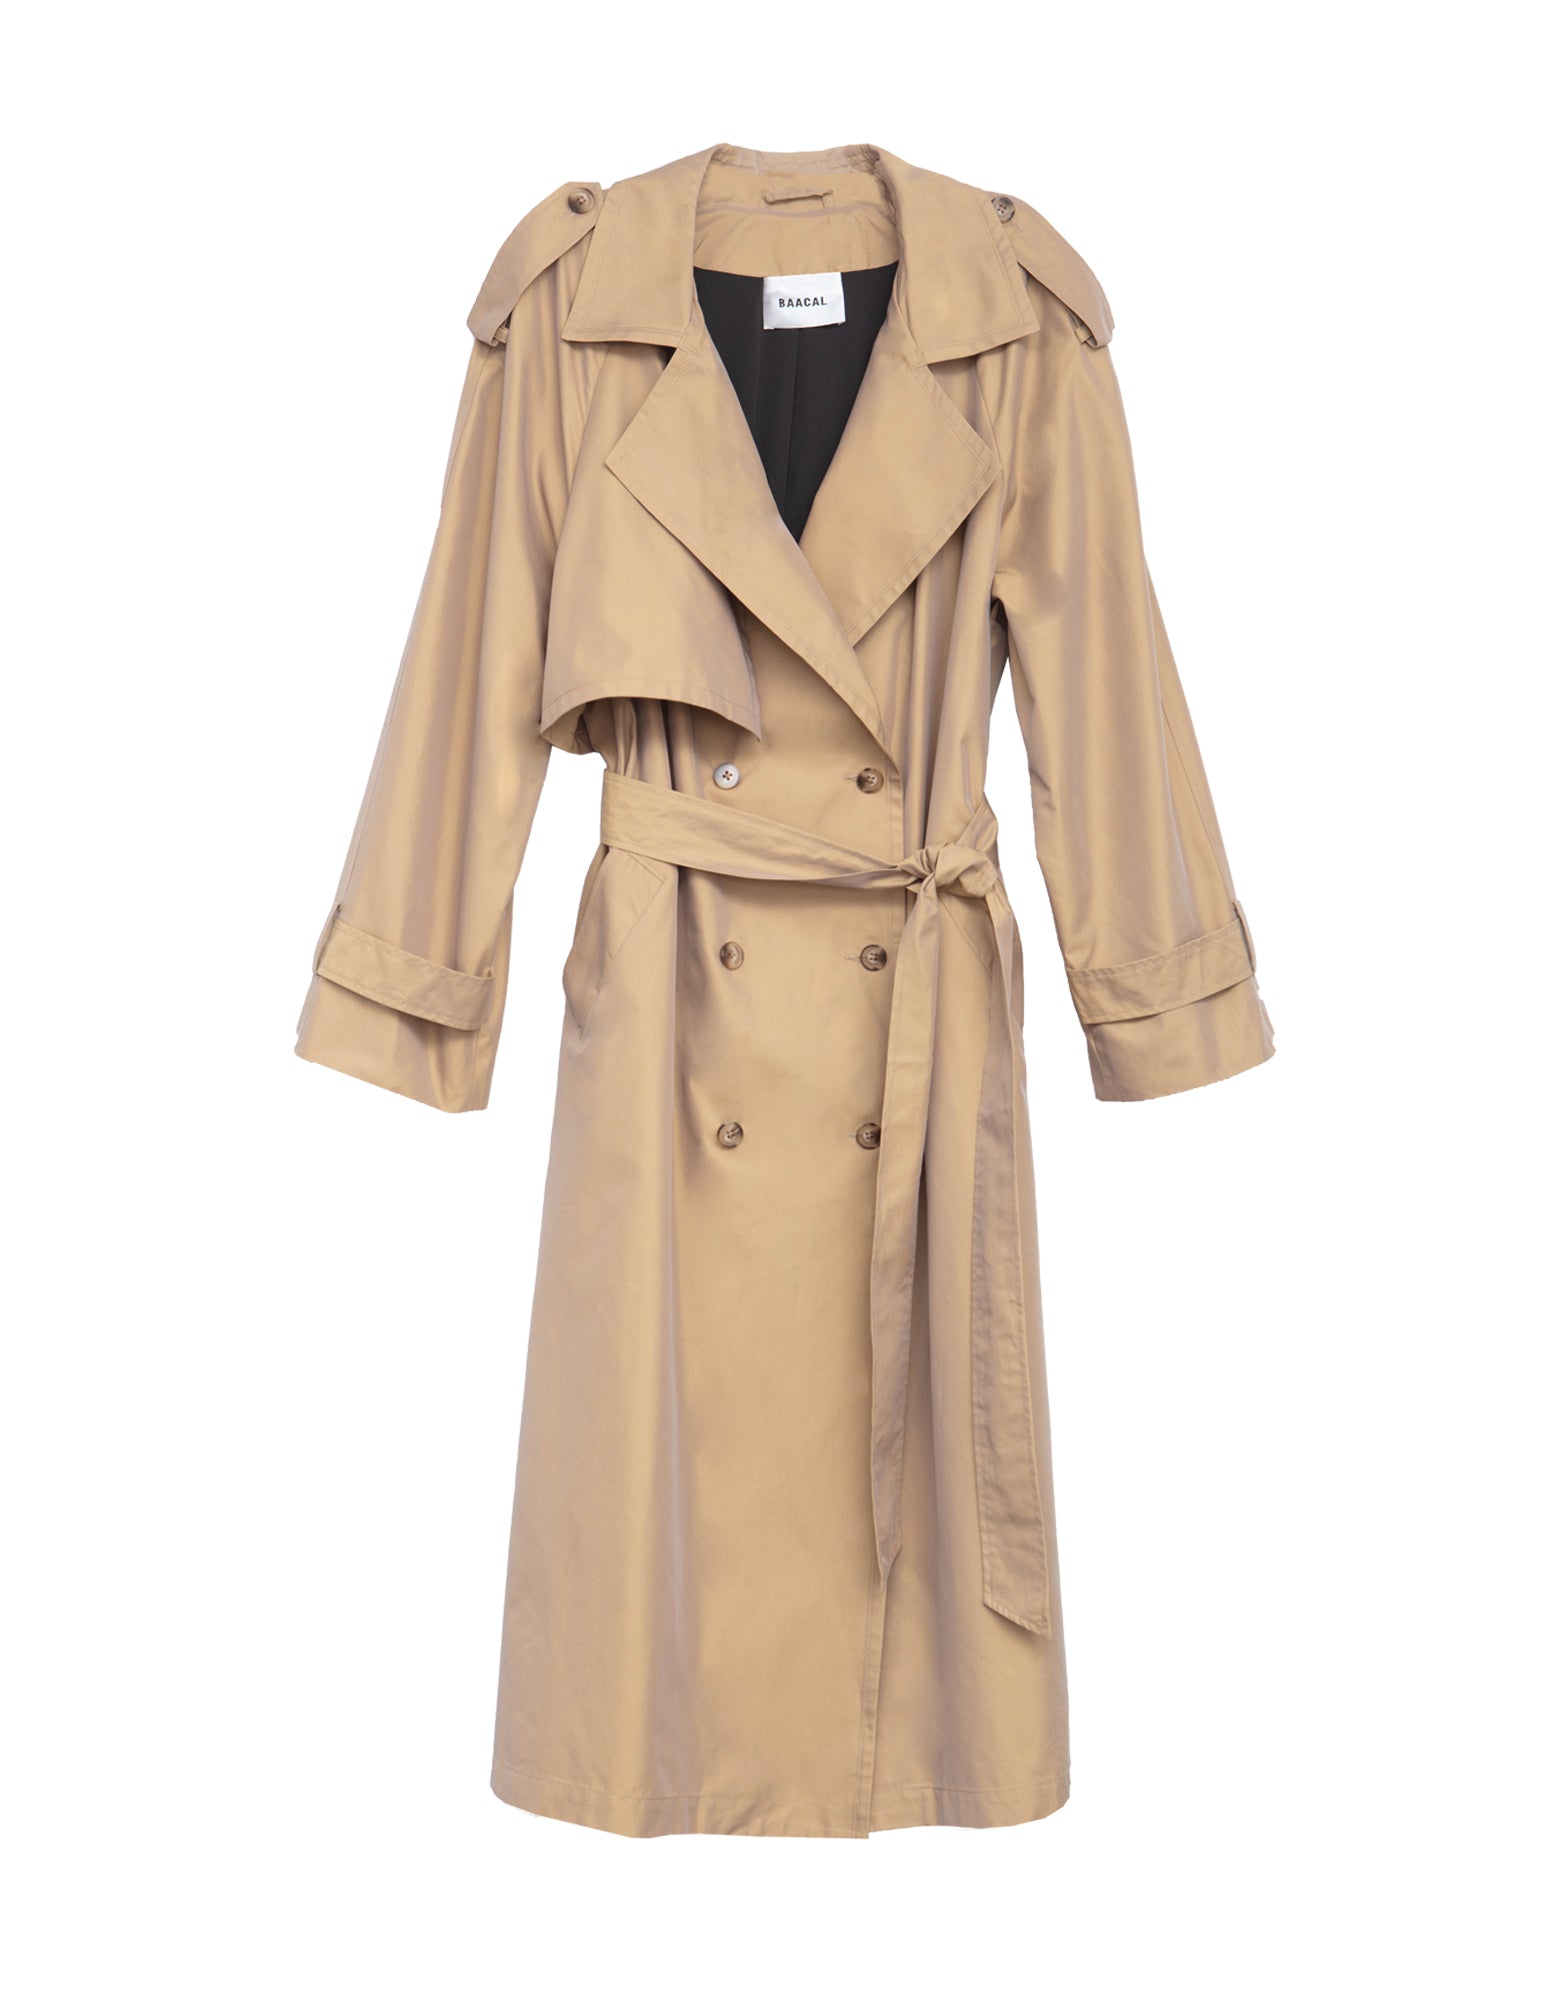 women's double breasted trench coat with belt in Khaki